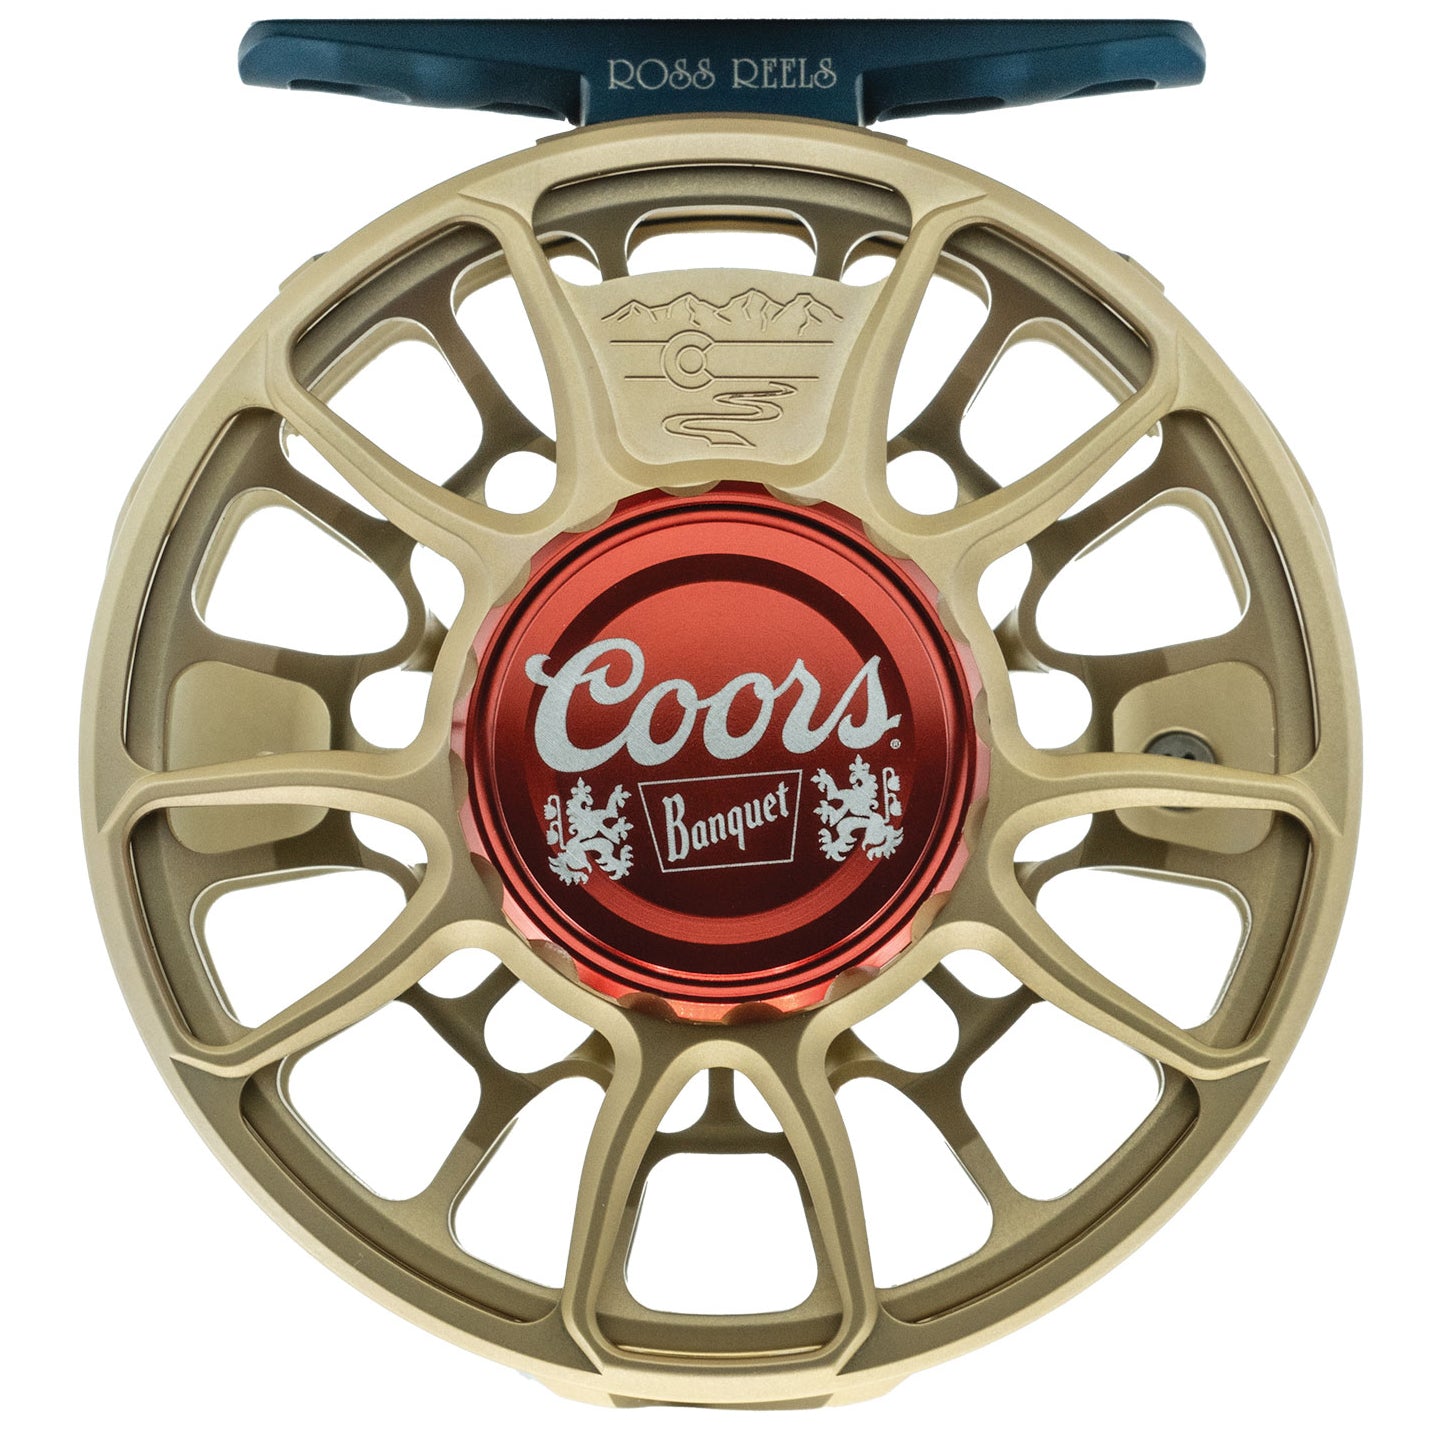 Ross Reels Coors Banquet Animas 5/6 - Limited Edition – Big Sky Anglers